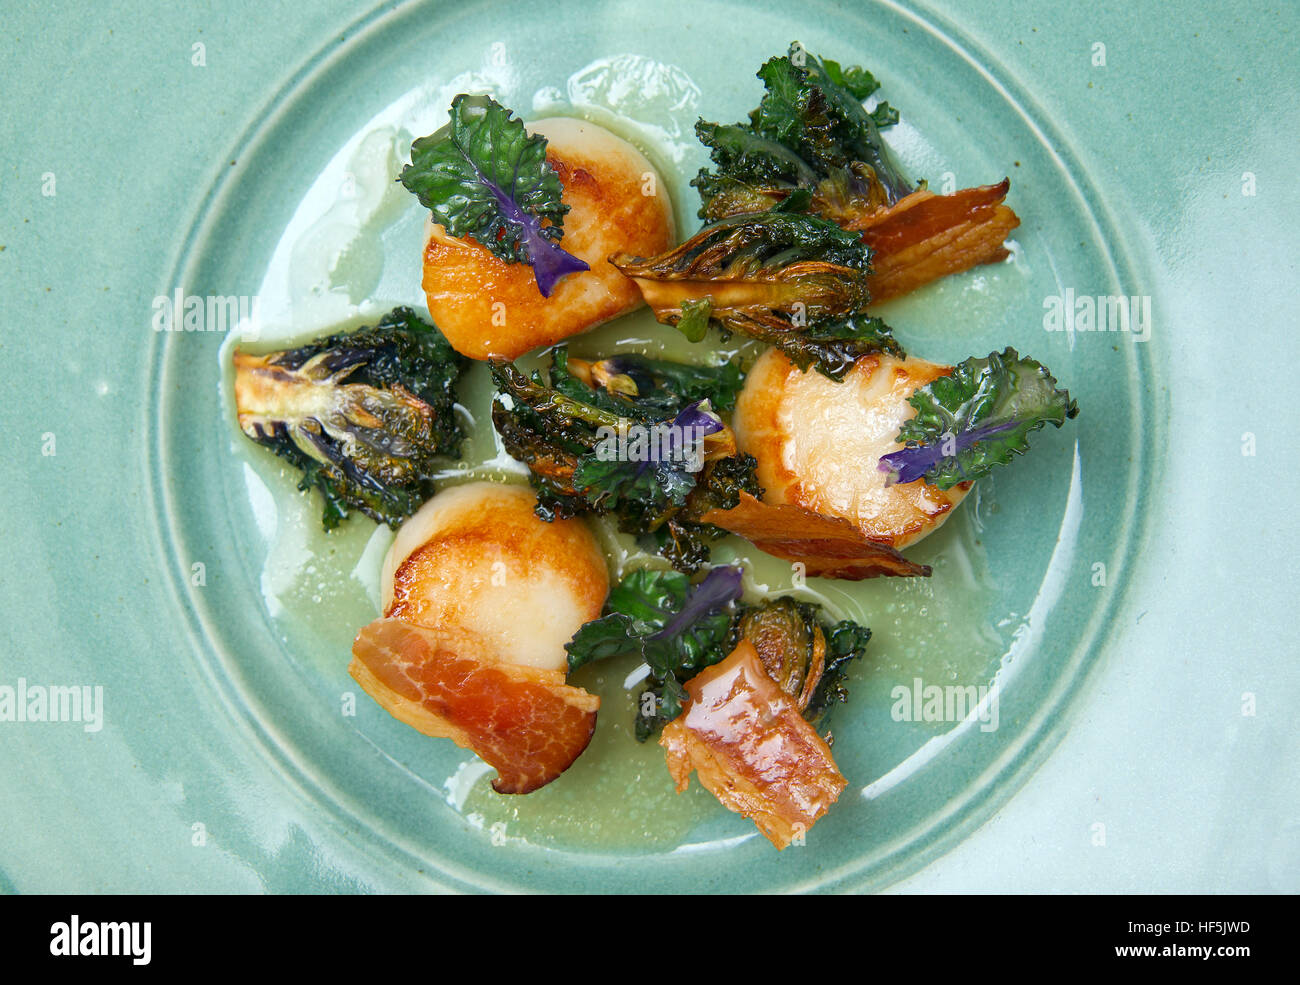 Kalettes being prepared, cooked and served in a scallop dish Stock Photo